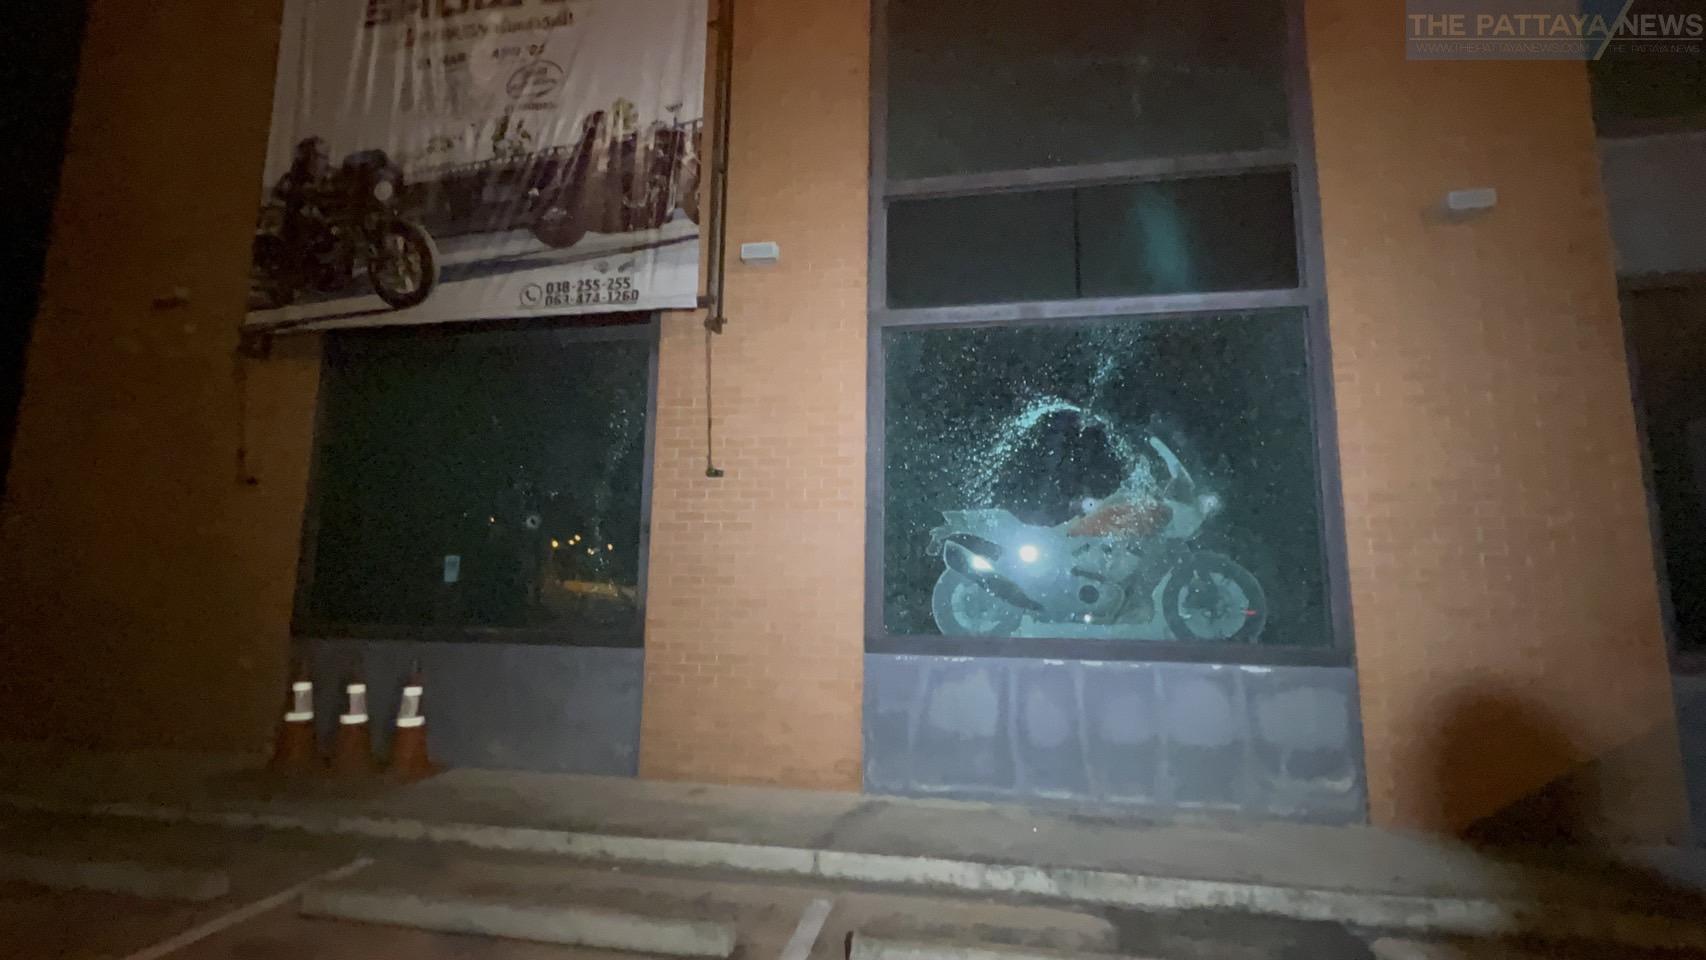 Four suspects allegedly shoot more than 10 bullets into Harley-Davidson Pattaya shop overnight